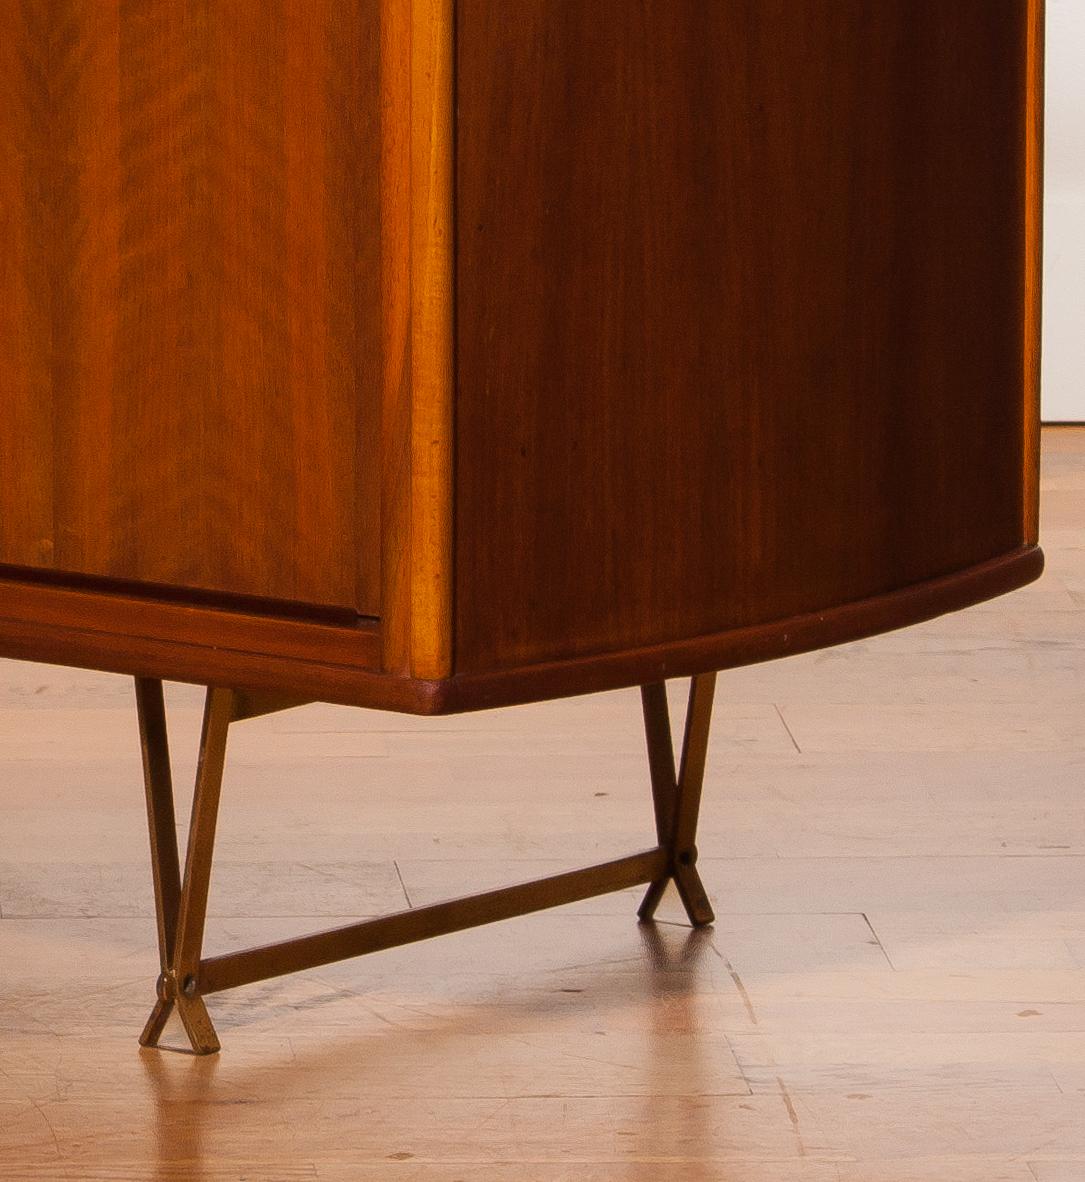 Beautiful unique sideboard designed by William Watting for Fristho.
The cabinet is made of teak wood with brass legs.
The sideboard has two sliding doors and five drawers with at the top two different sizes.
And beneath three large